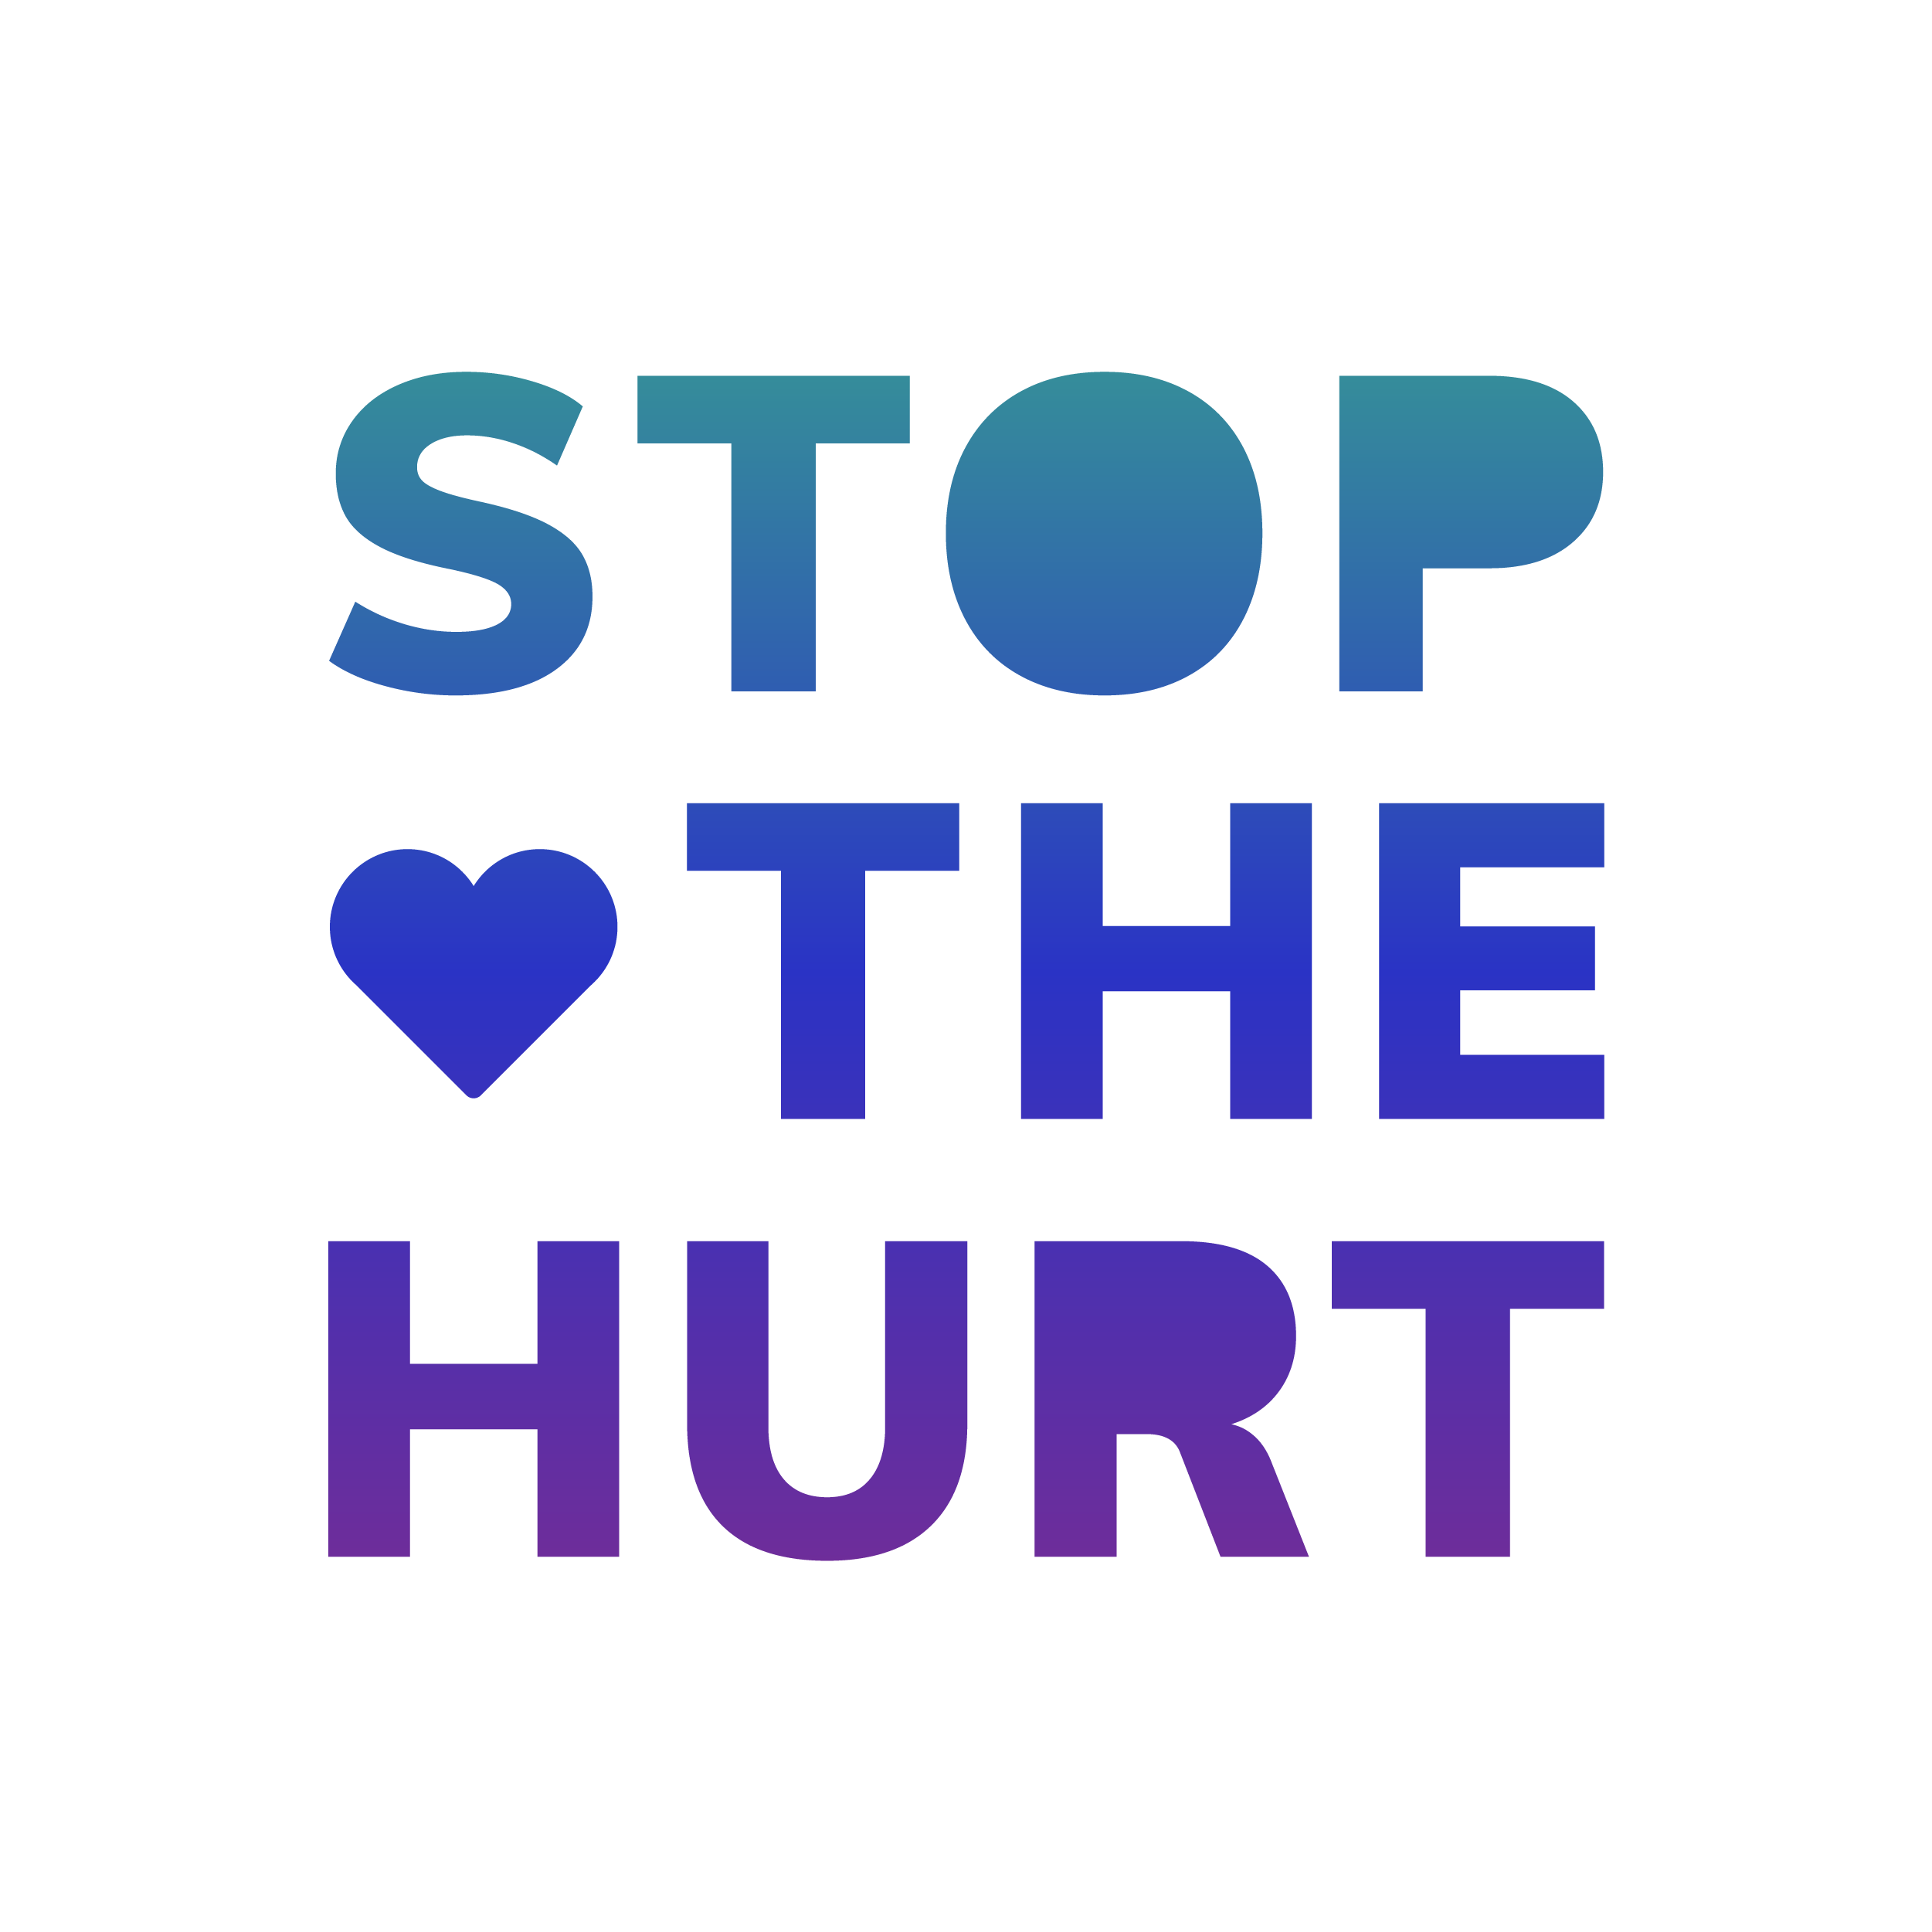 StopTheHurt is an educational resource for all people as they seek to develop positive relationships with peers, partners, family, and themselves.